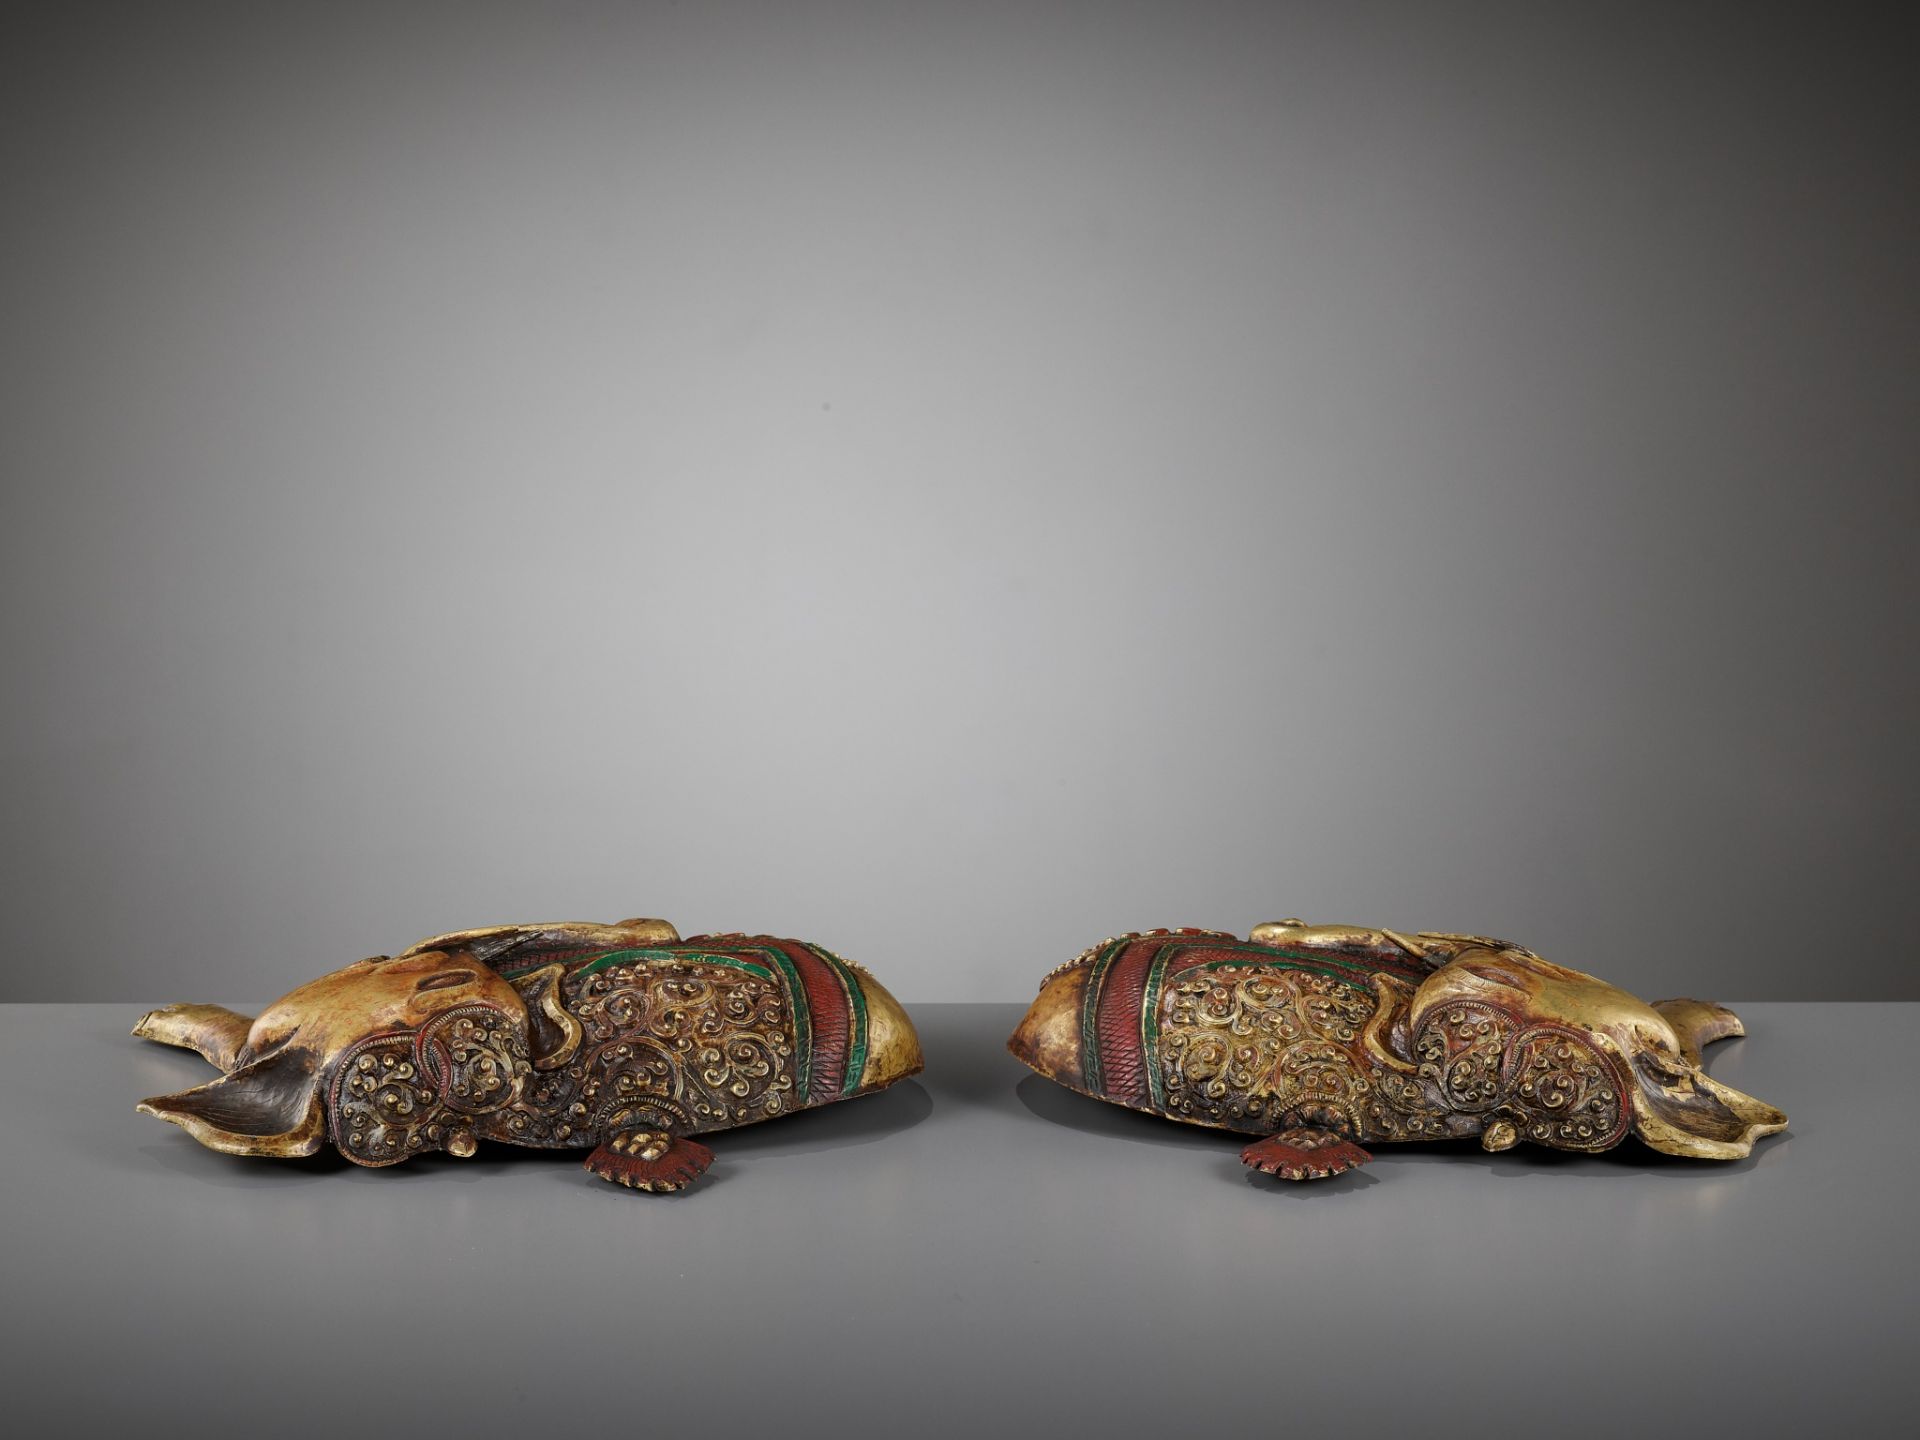 A PAIR OF GILT AND POLYCHROME-DECORATED COPPER REPOUSSE PLAQUES, HASTIRATNA, 17TH-18TH CENTURY - Image 10 of 12